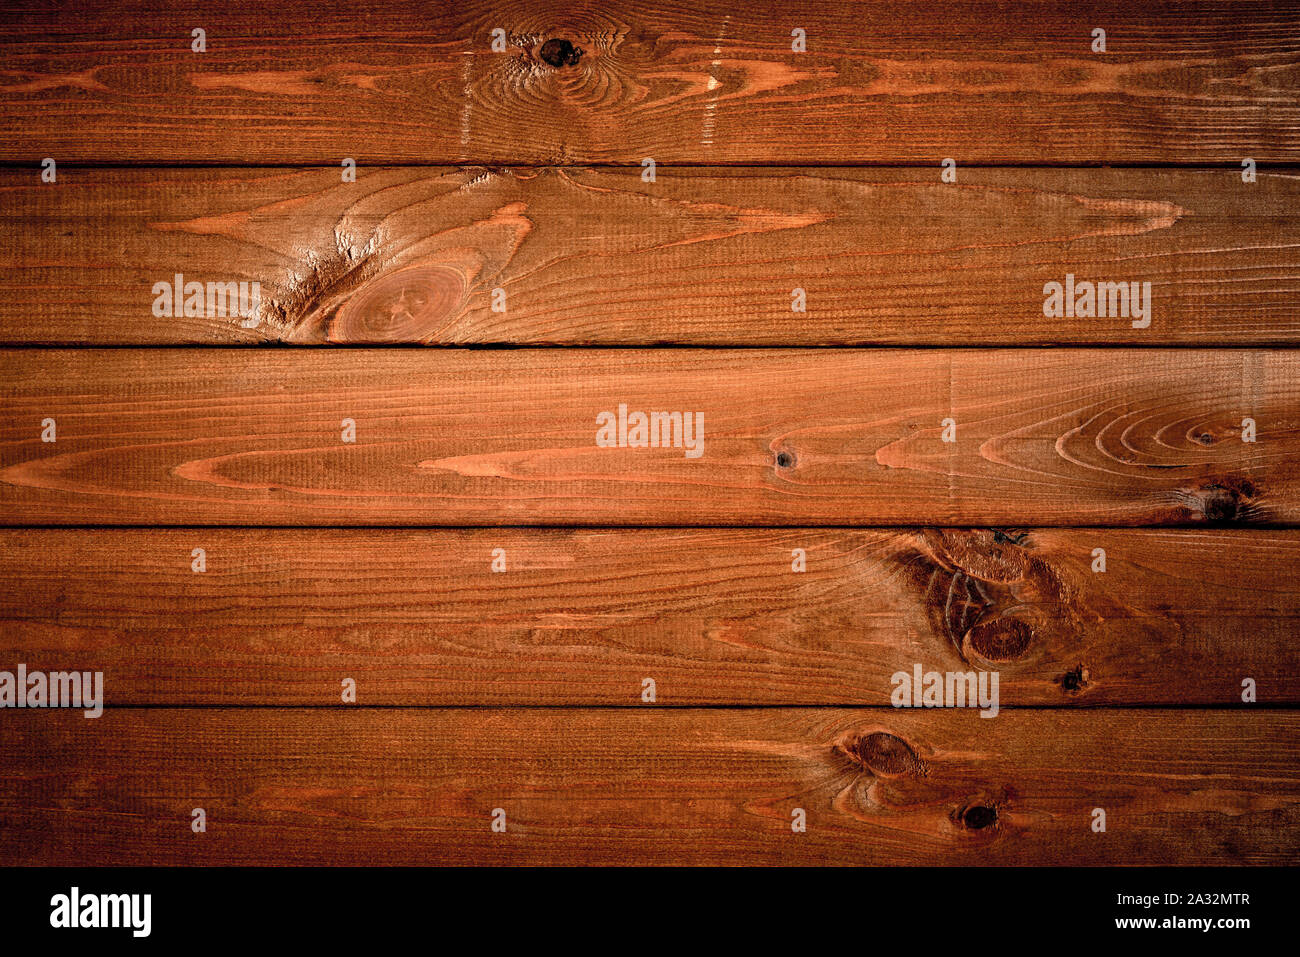 Rustic wood planks background, wood texture Stock Photo